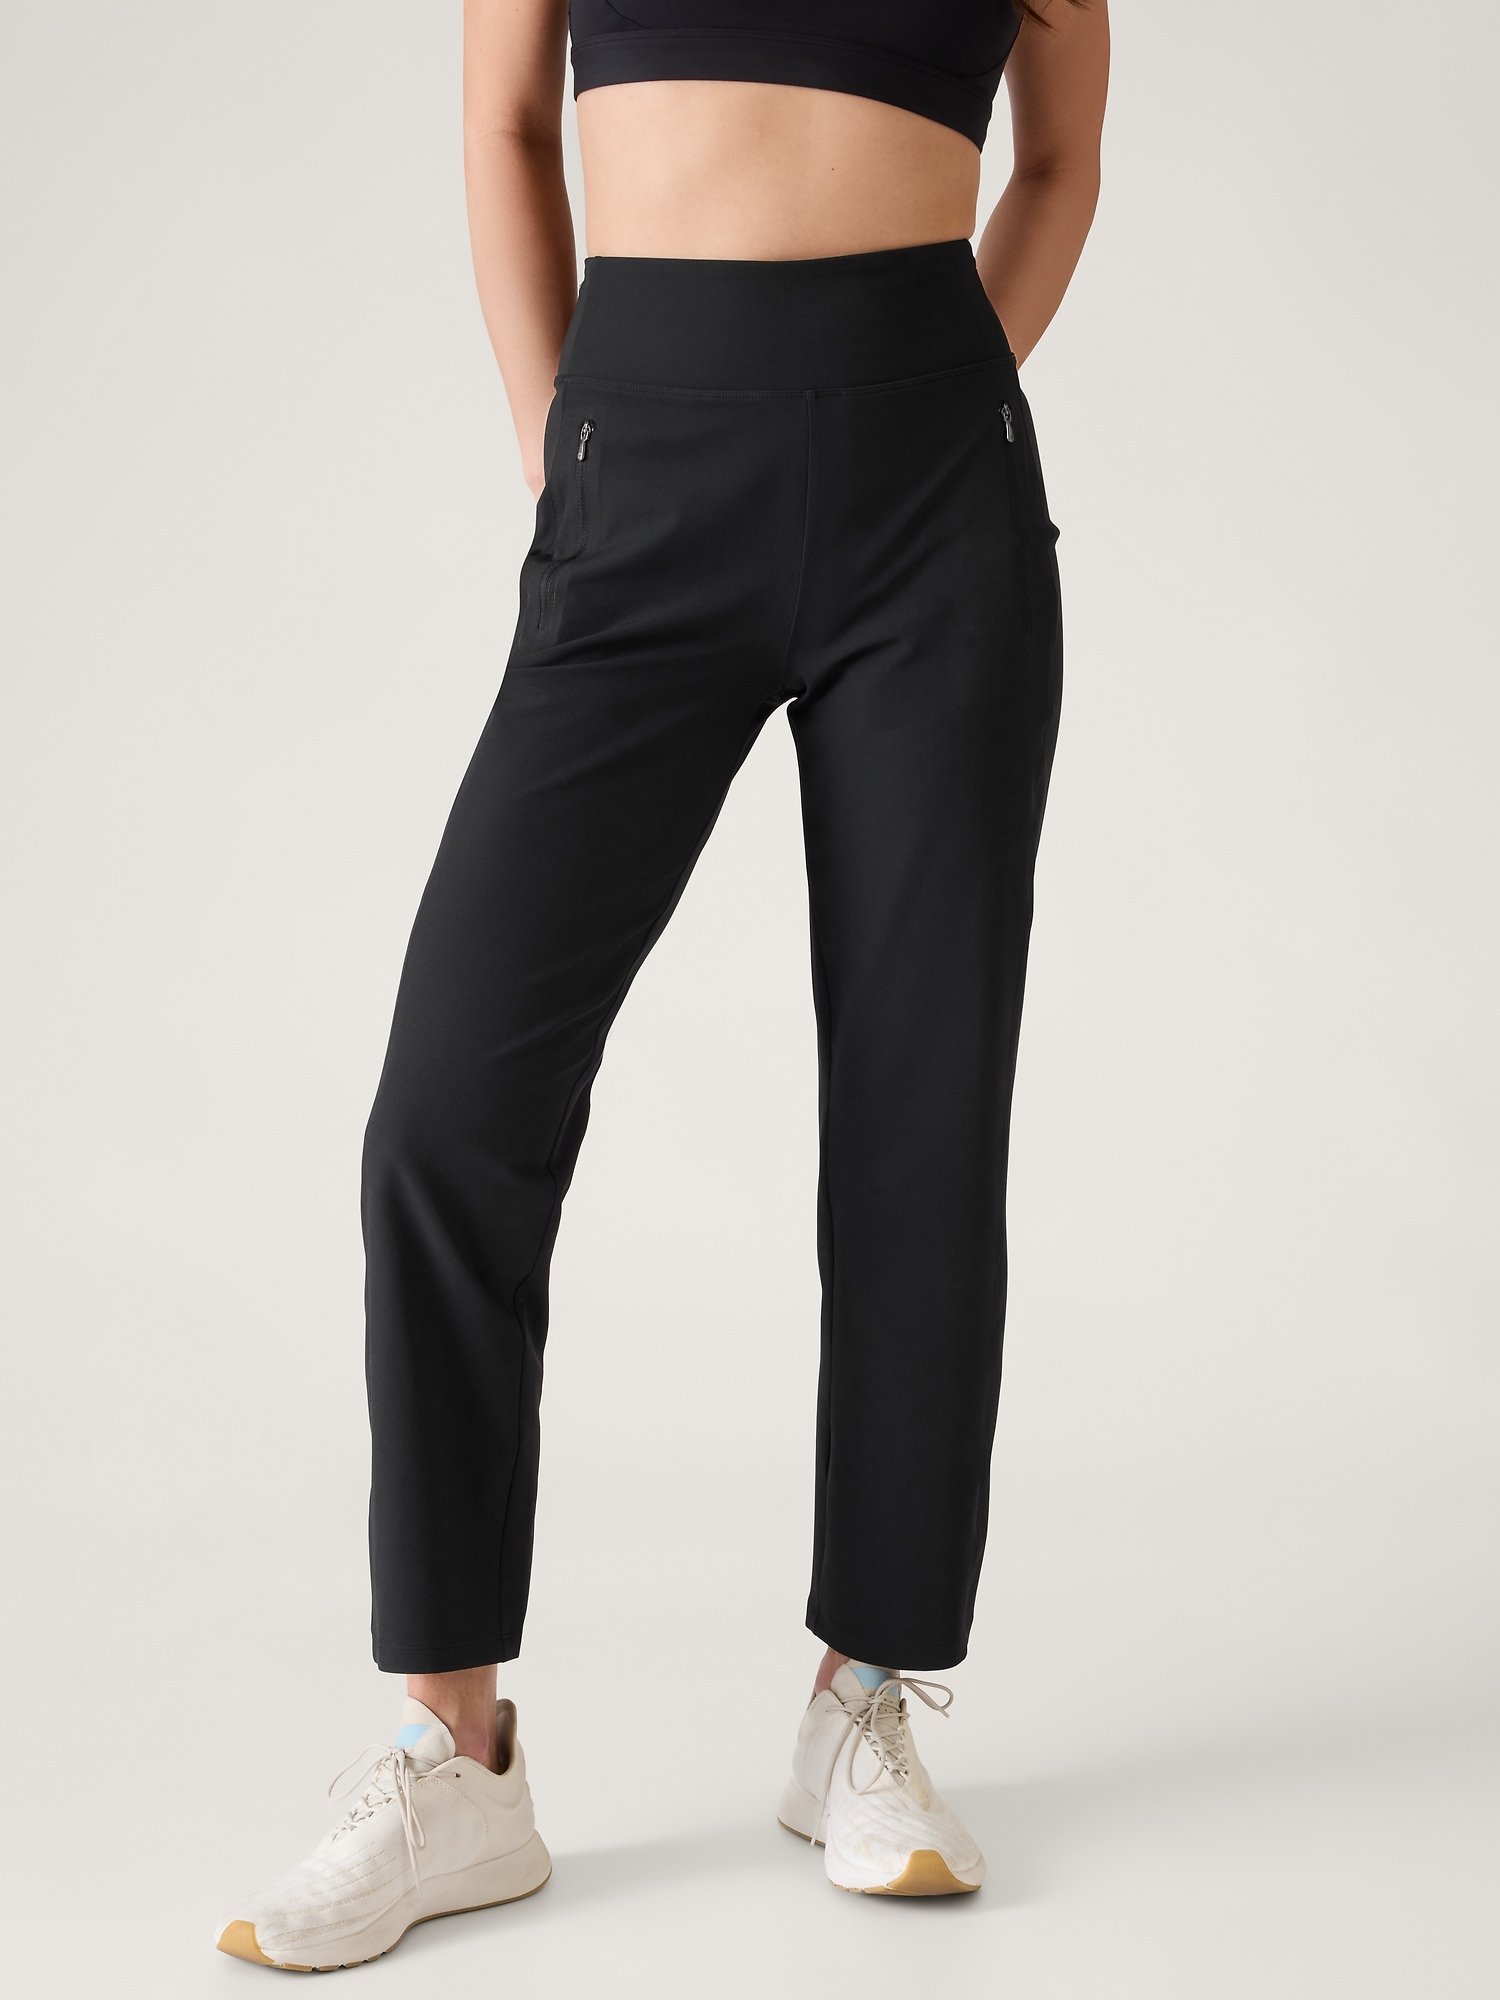 Athletic Pants for Women